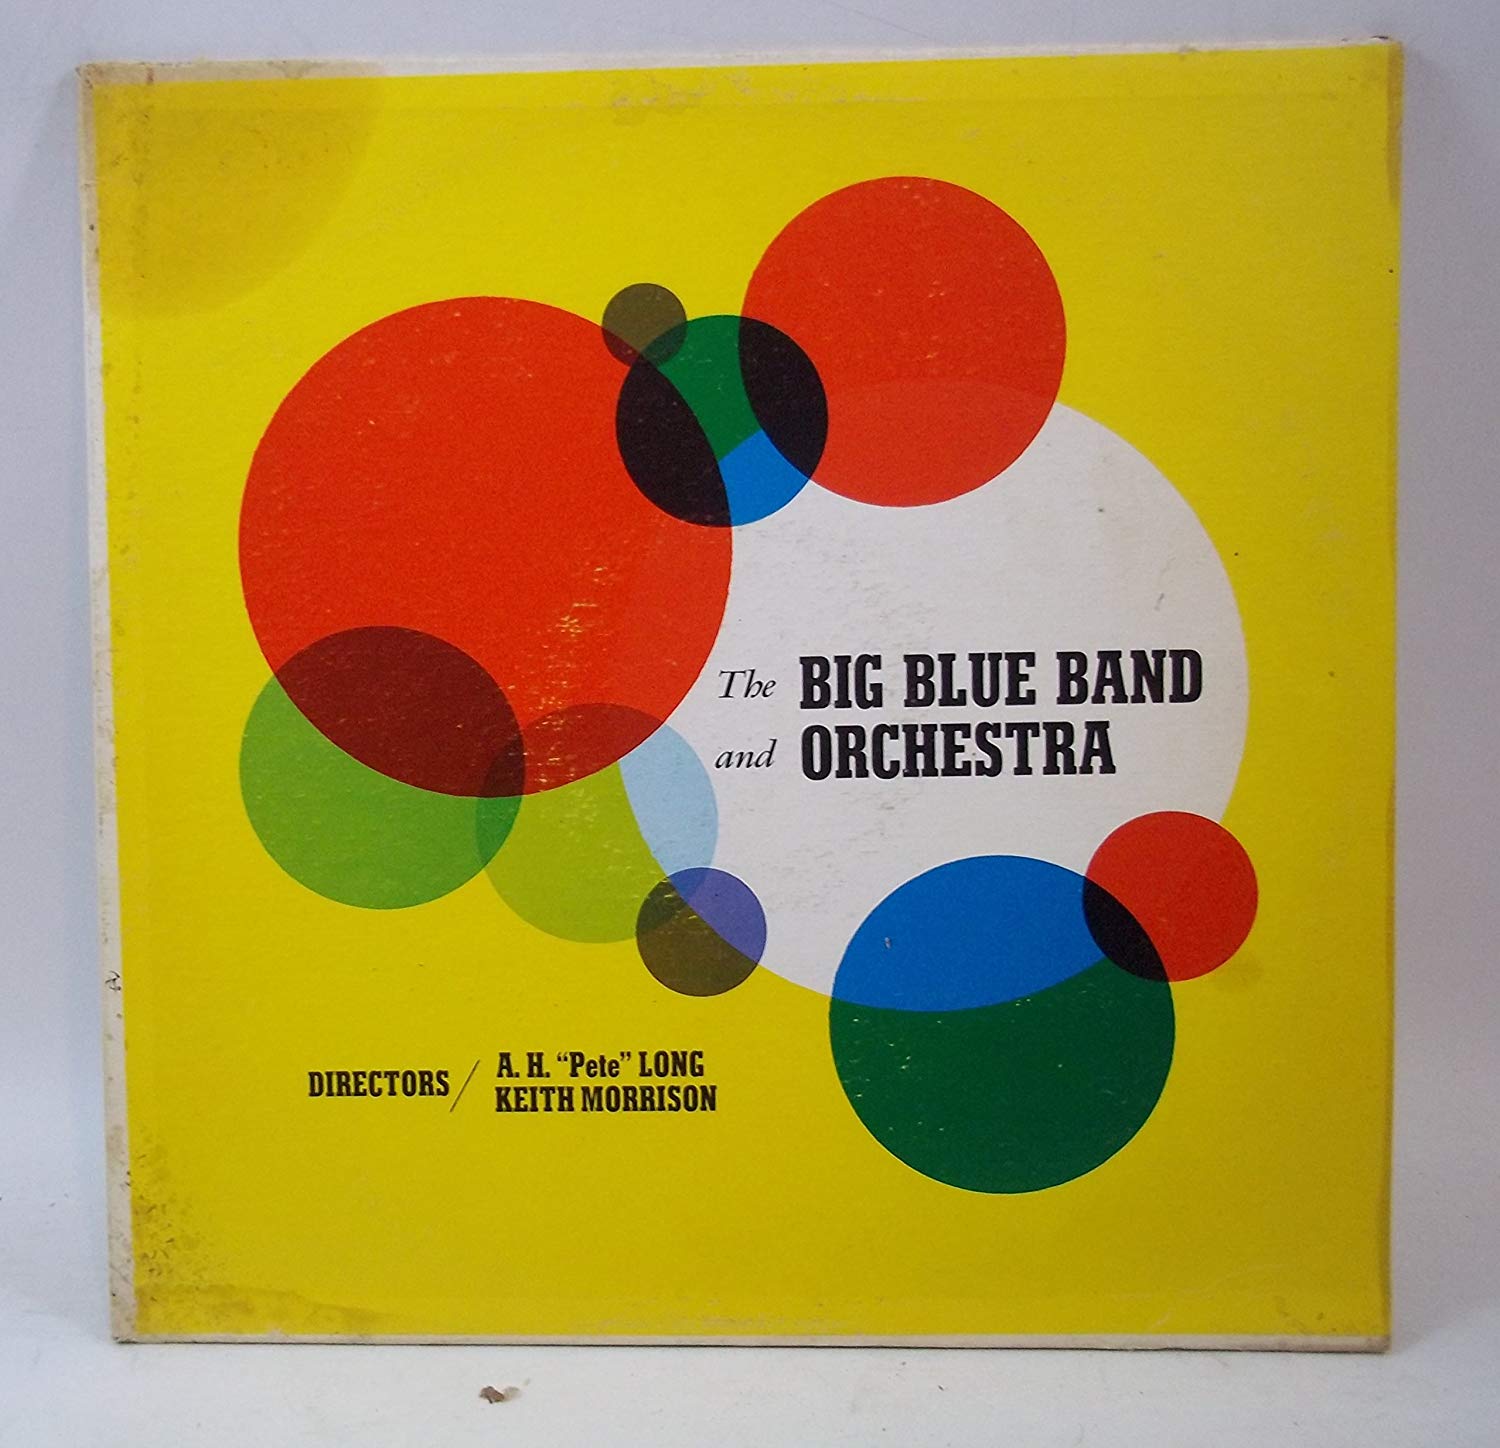 Red Circle with Blue Band Logo - AH Pete Long, Keith Morrison The Big Blue Band and Orchestra - The ...